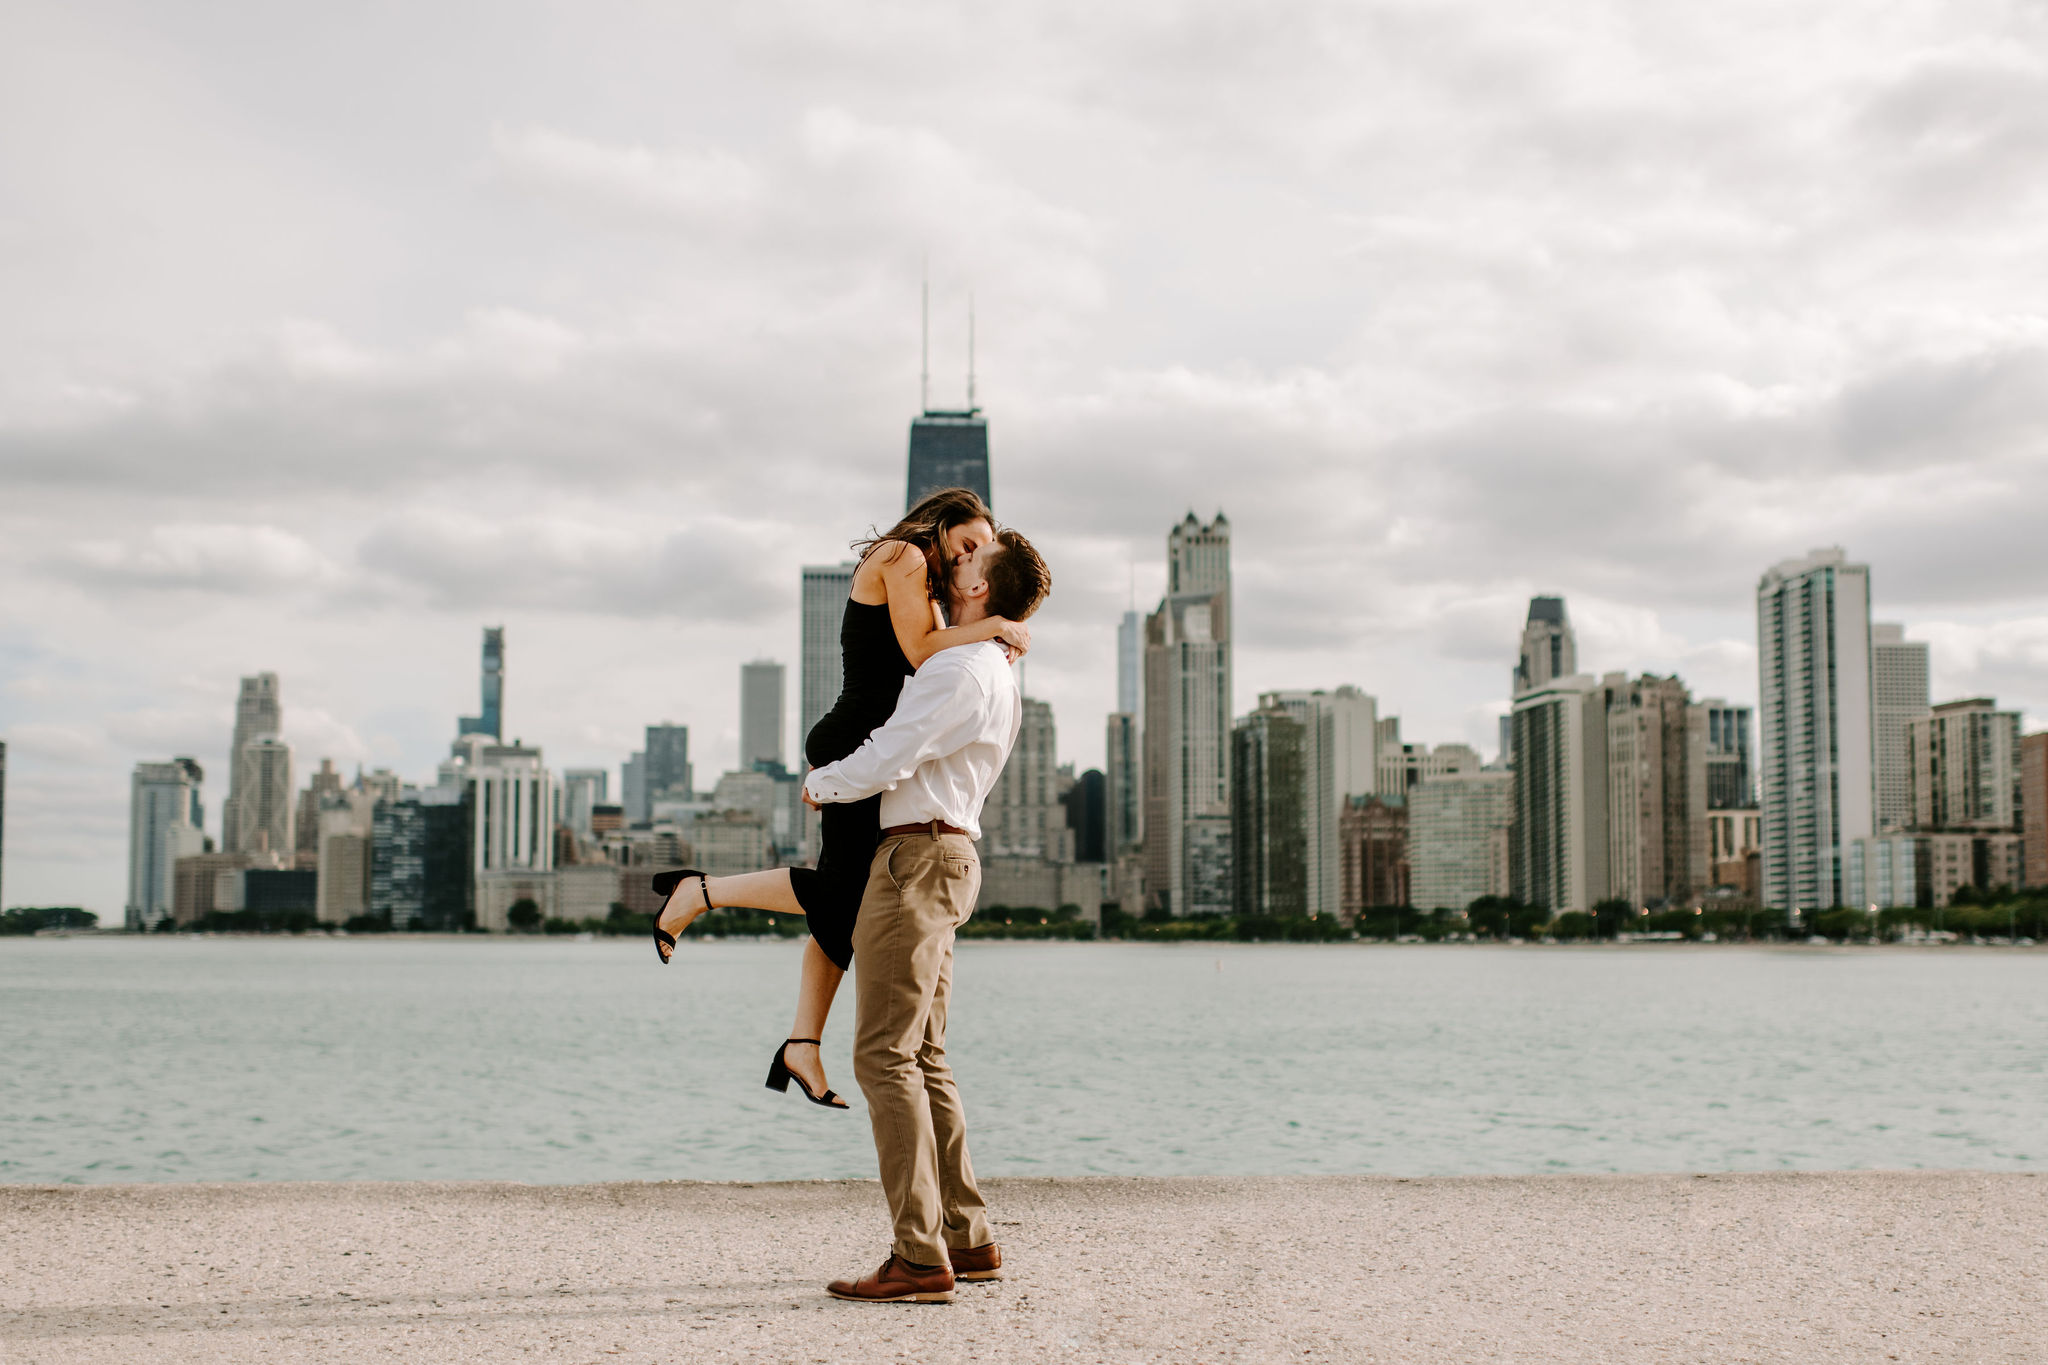 Chicago, Illinois | Top 5 Best Photo Spots in Chicago by Photographs by Teresa. This blog post includes posing and location ideas for photoshoots. Book your Chicago photo session and browse the blog for more inspiration #couples #photography #chicagophotographer